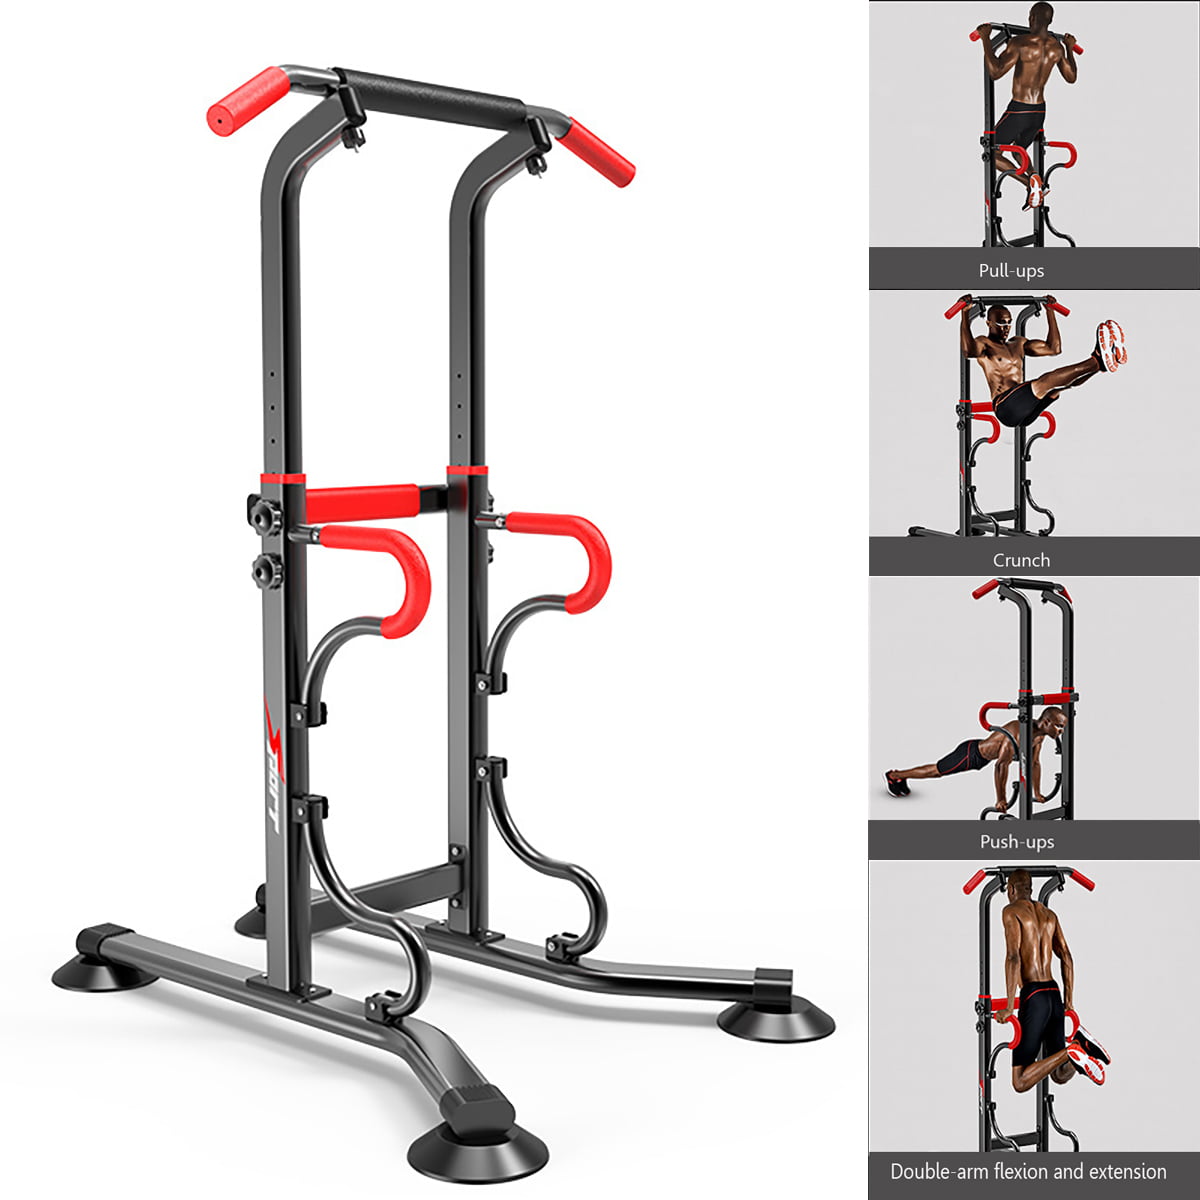 ZENOVA Power Tower Pull Up Bar Station Workout Dip Station Multi-Function Pull up Tower with J Hook Home Strength Training Workout Equipment 